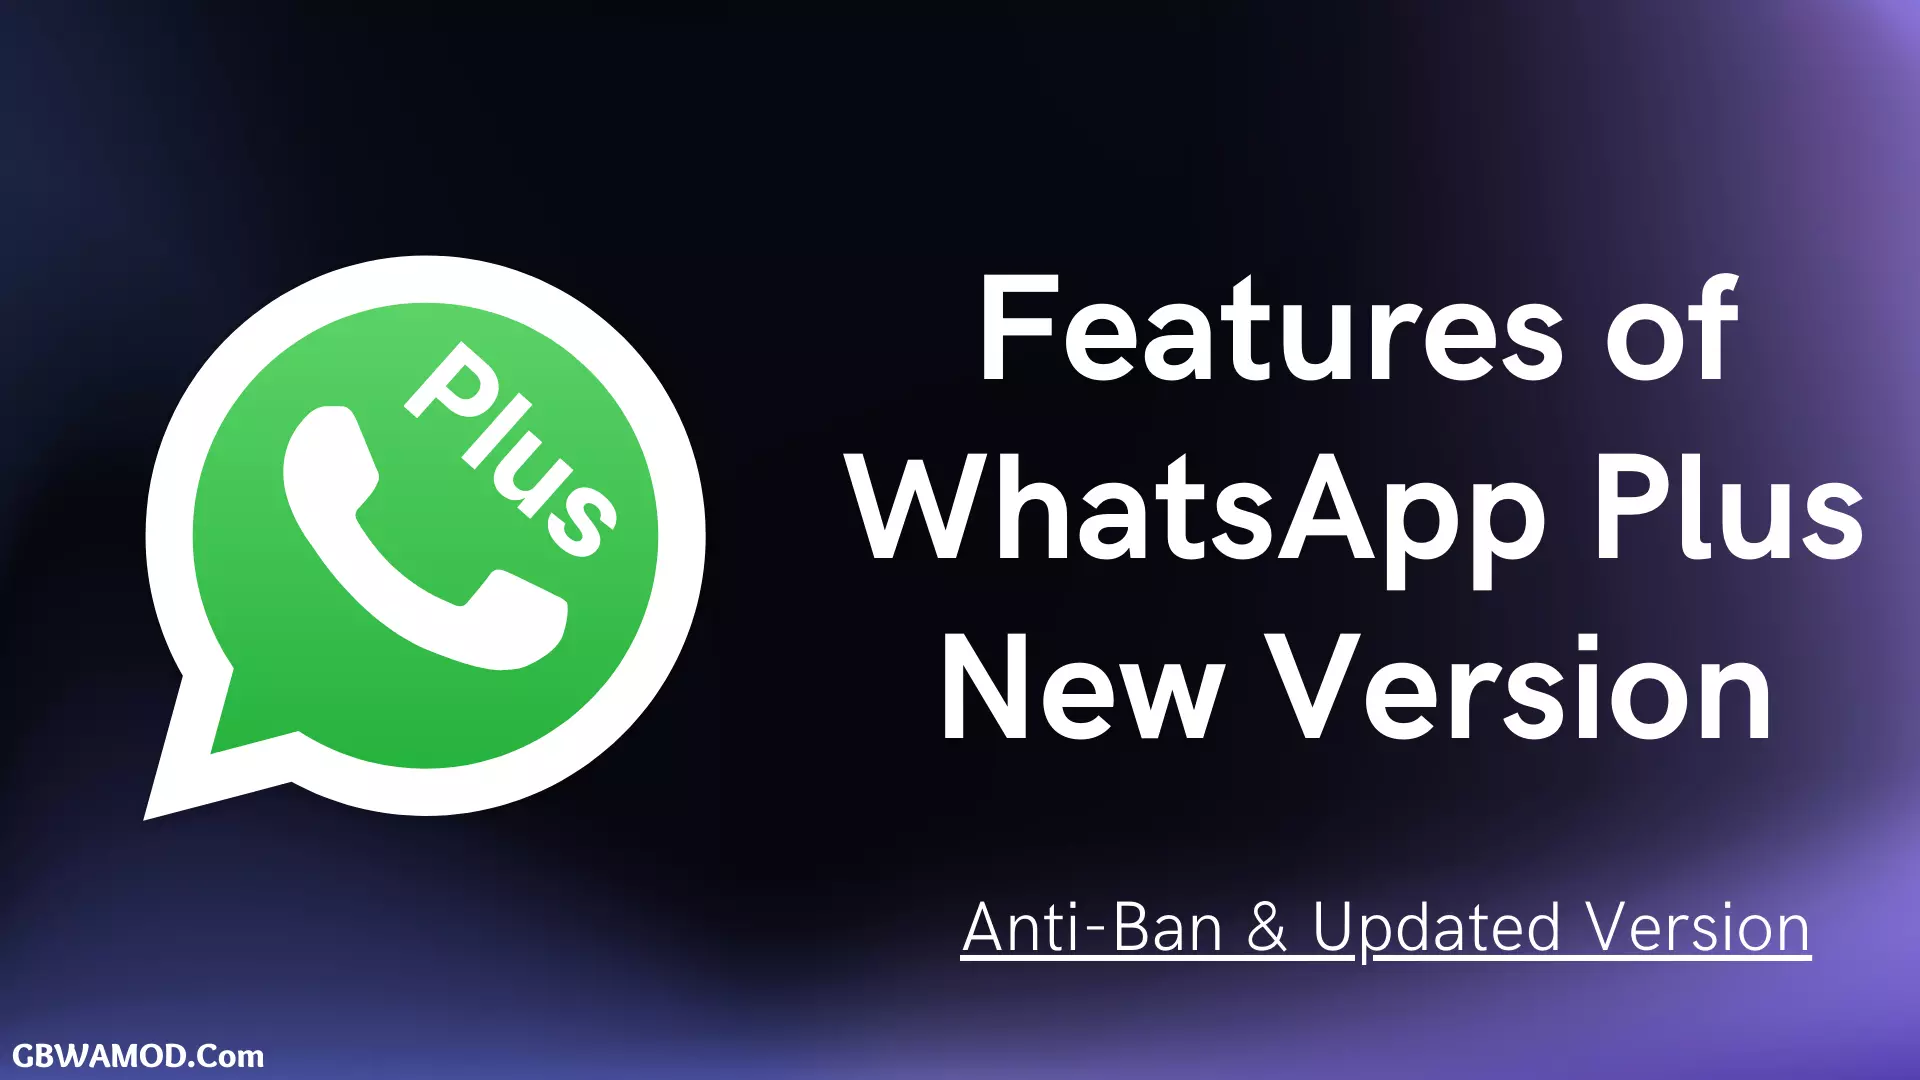 Features of WhatsApp Plus New Version